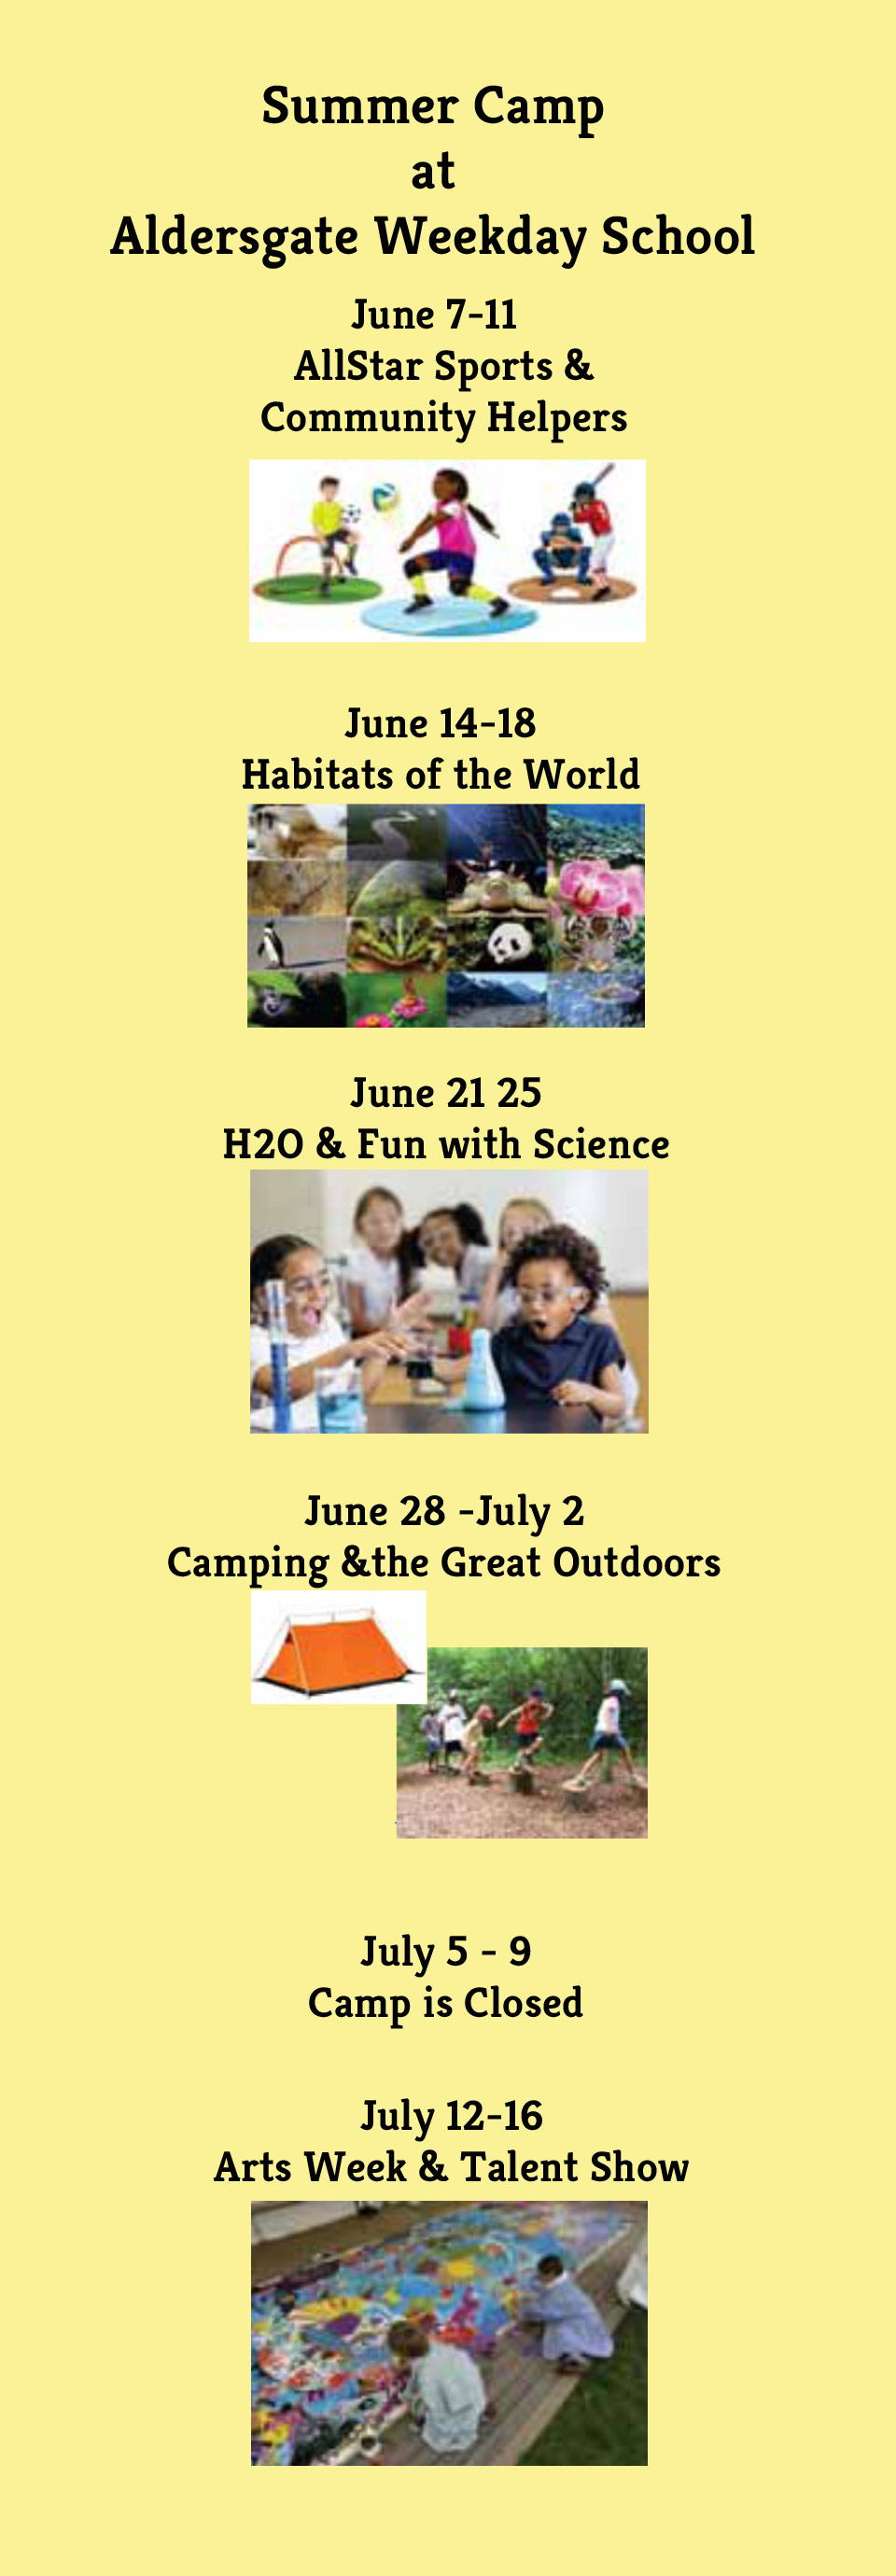 Themes and Dates for Summer Camp at Aldersgate Weekday School